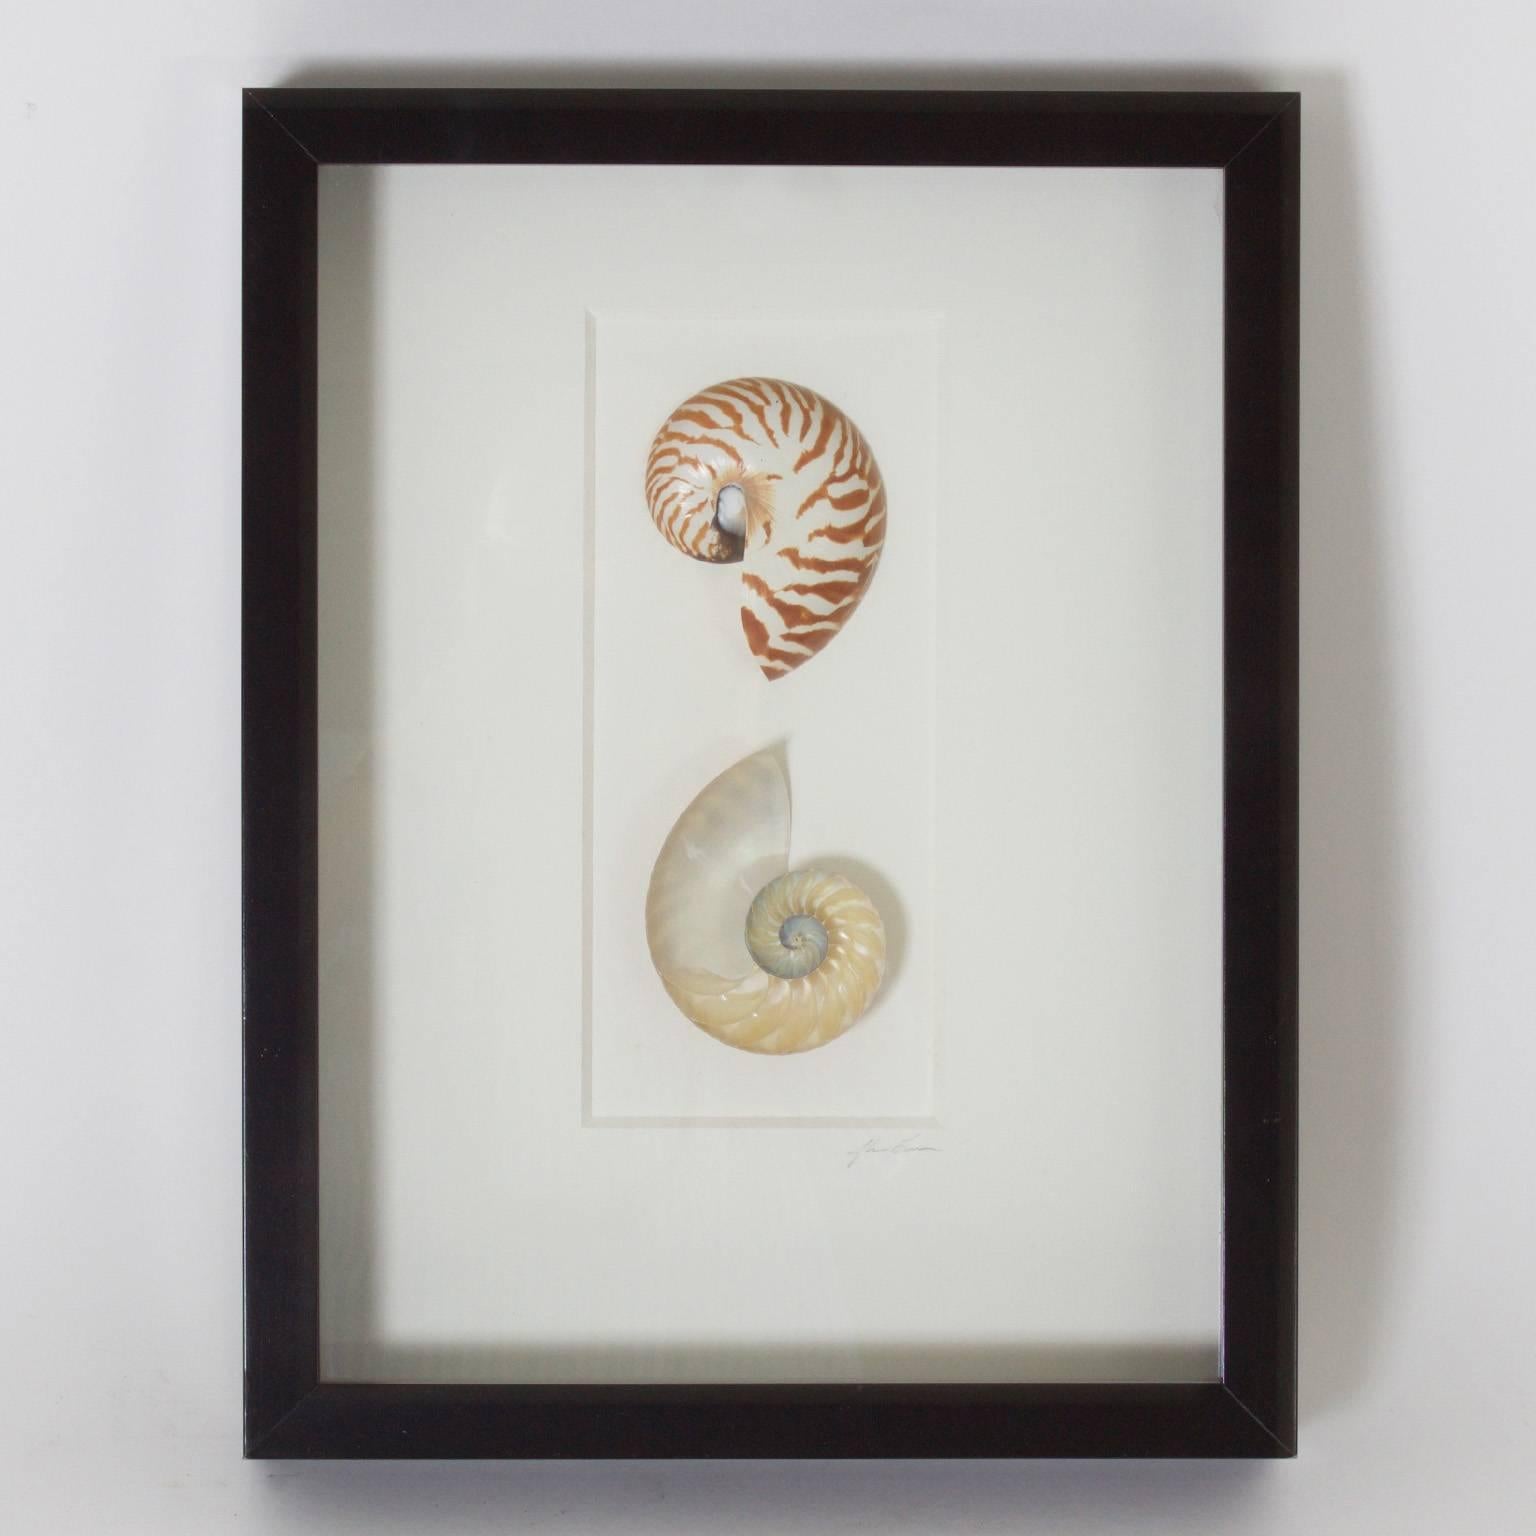 Inspired set of three decorative groups of seashell specimens, carefully curated and presented in a shadow box format. One of three sets offered. 

 